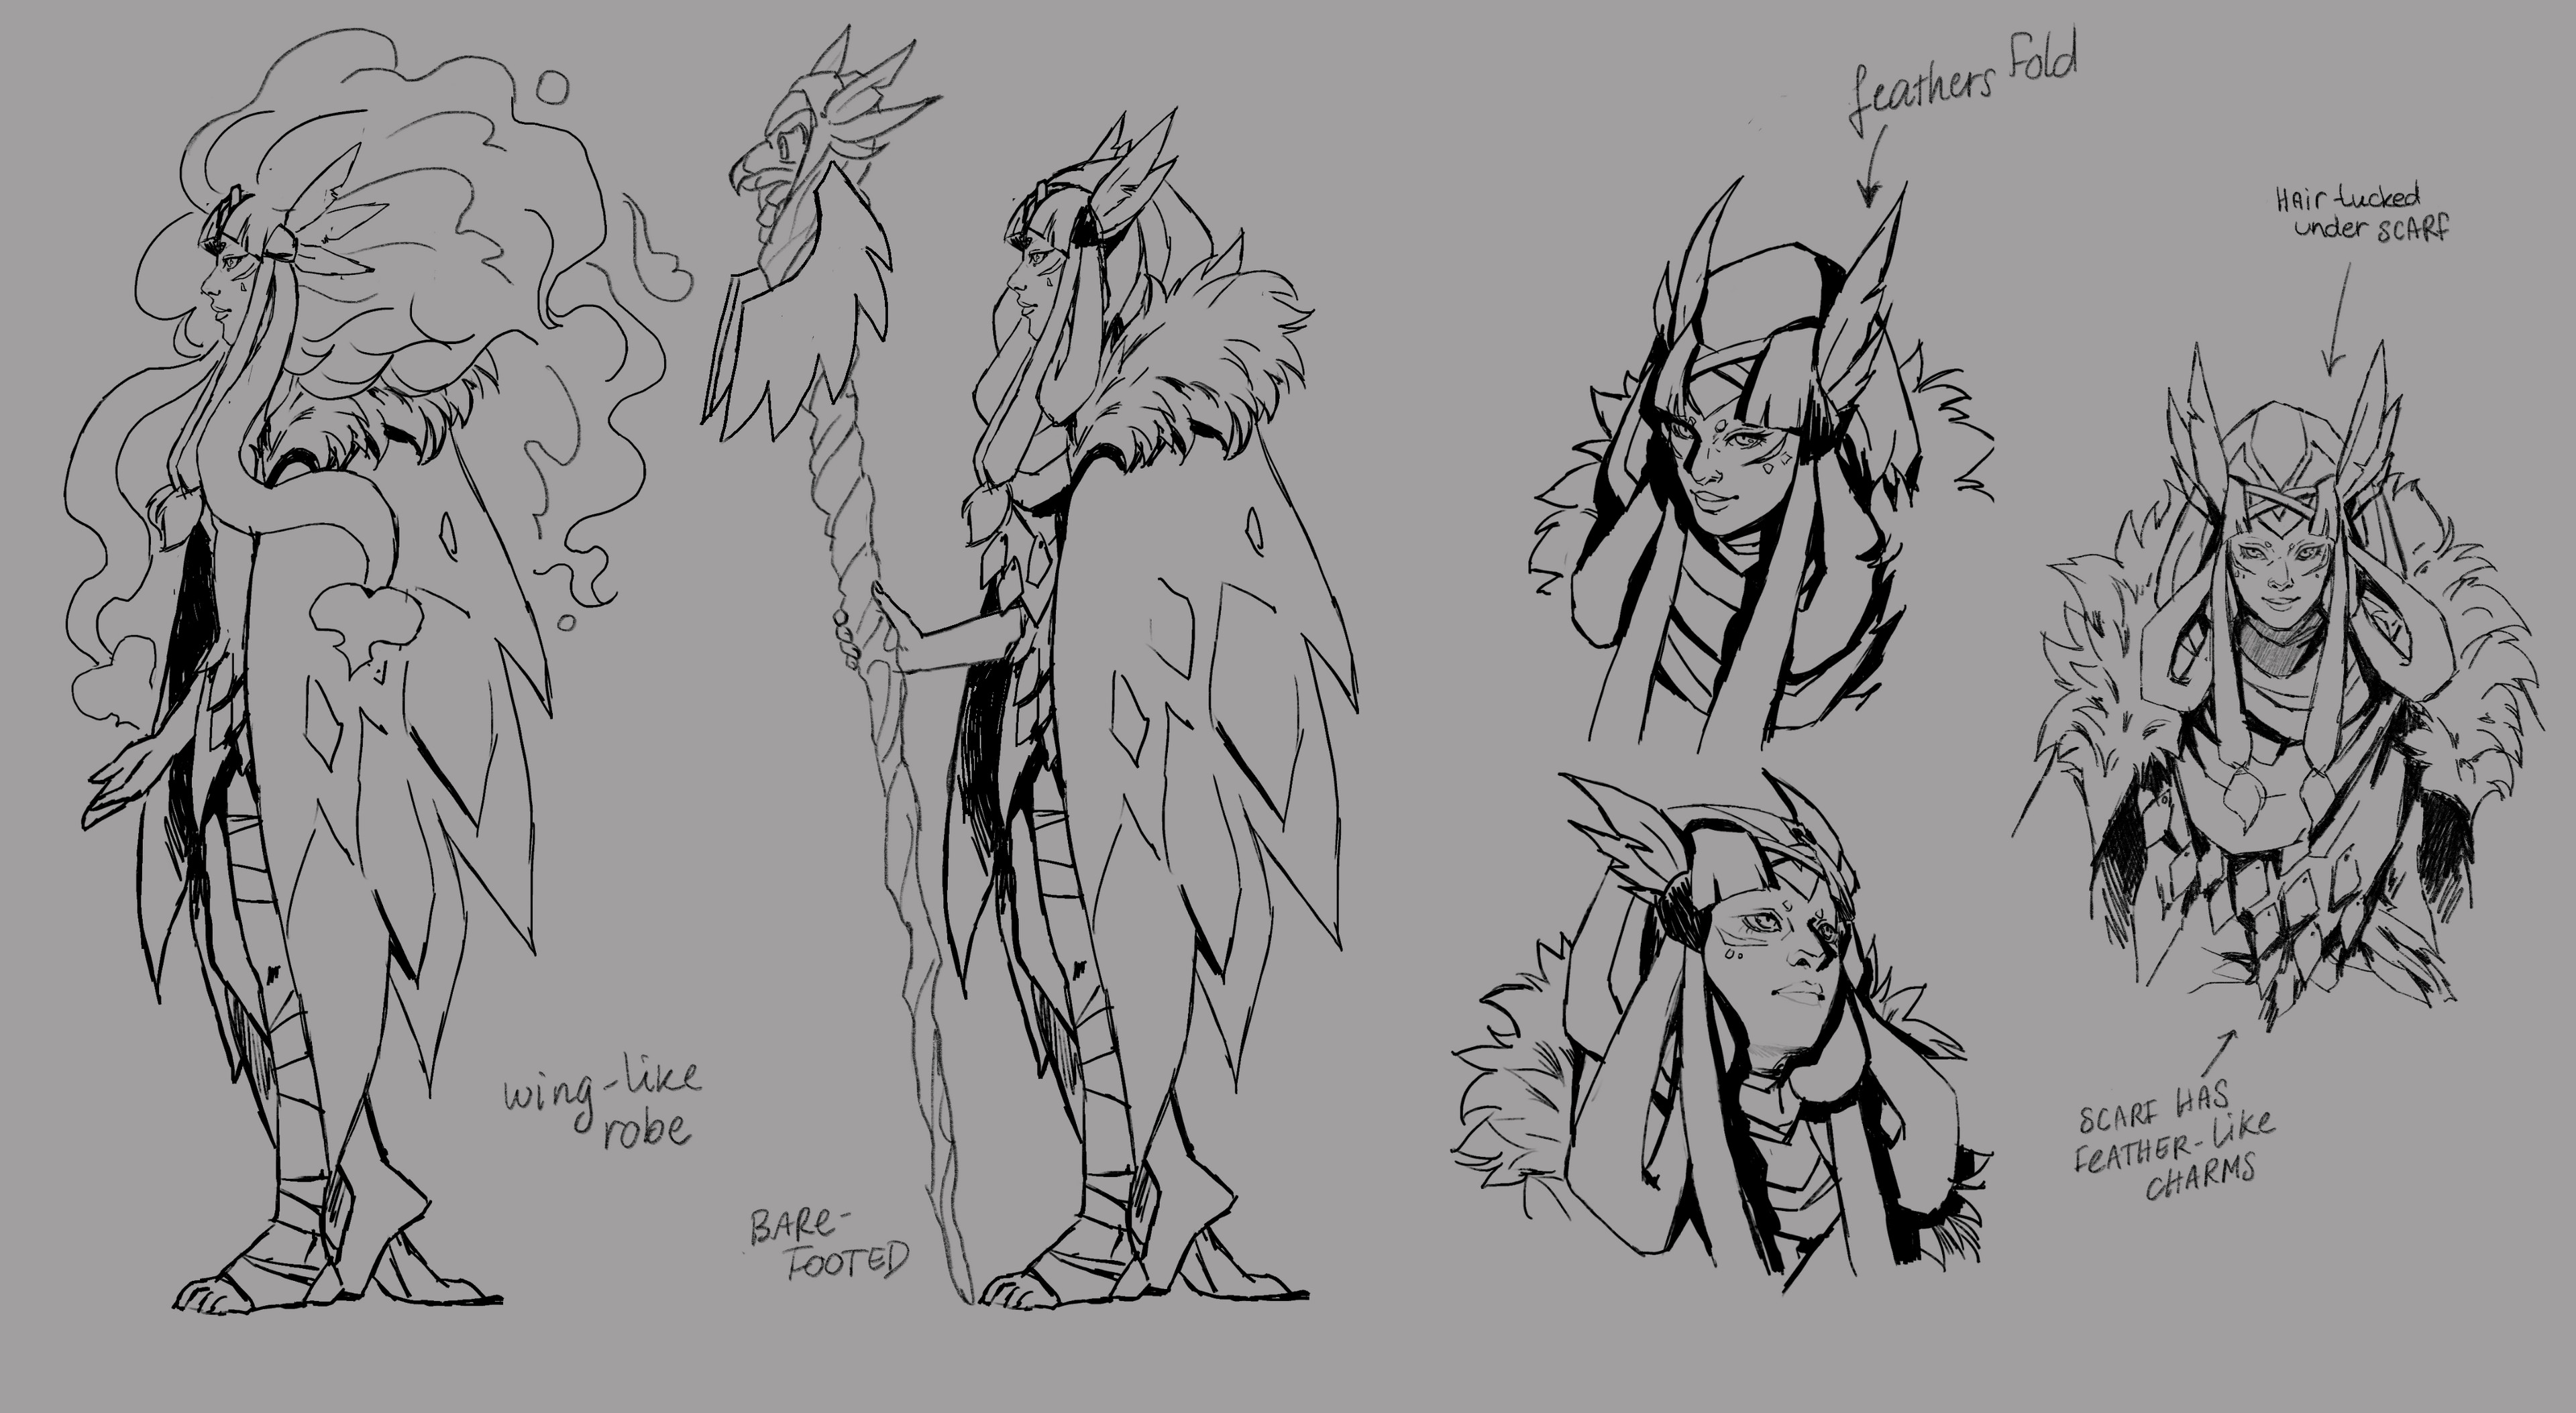 some sketches to explore her design further.